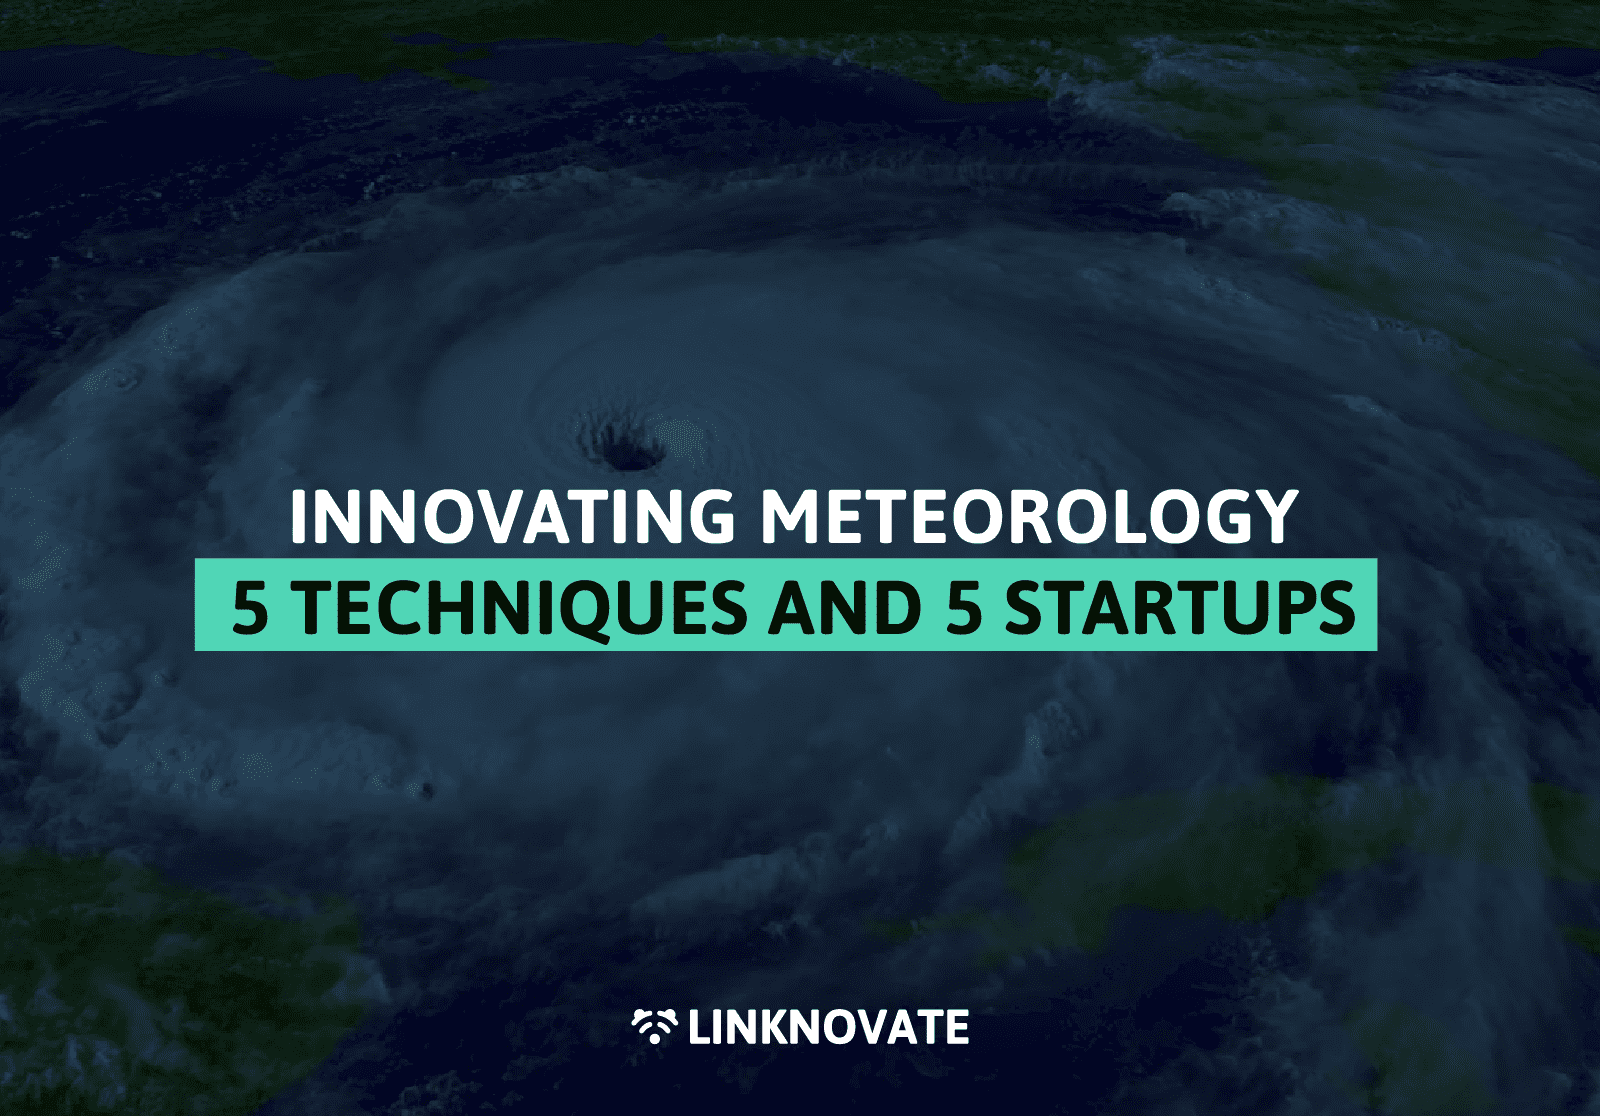 Innovating meteorology: 5 techniques and 5 startups to know